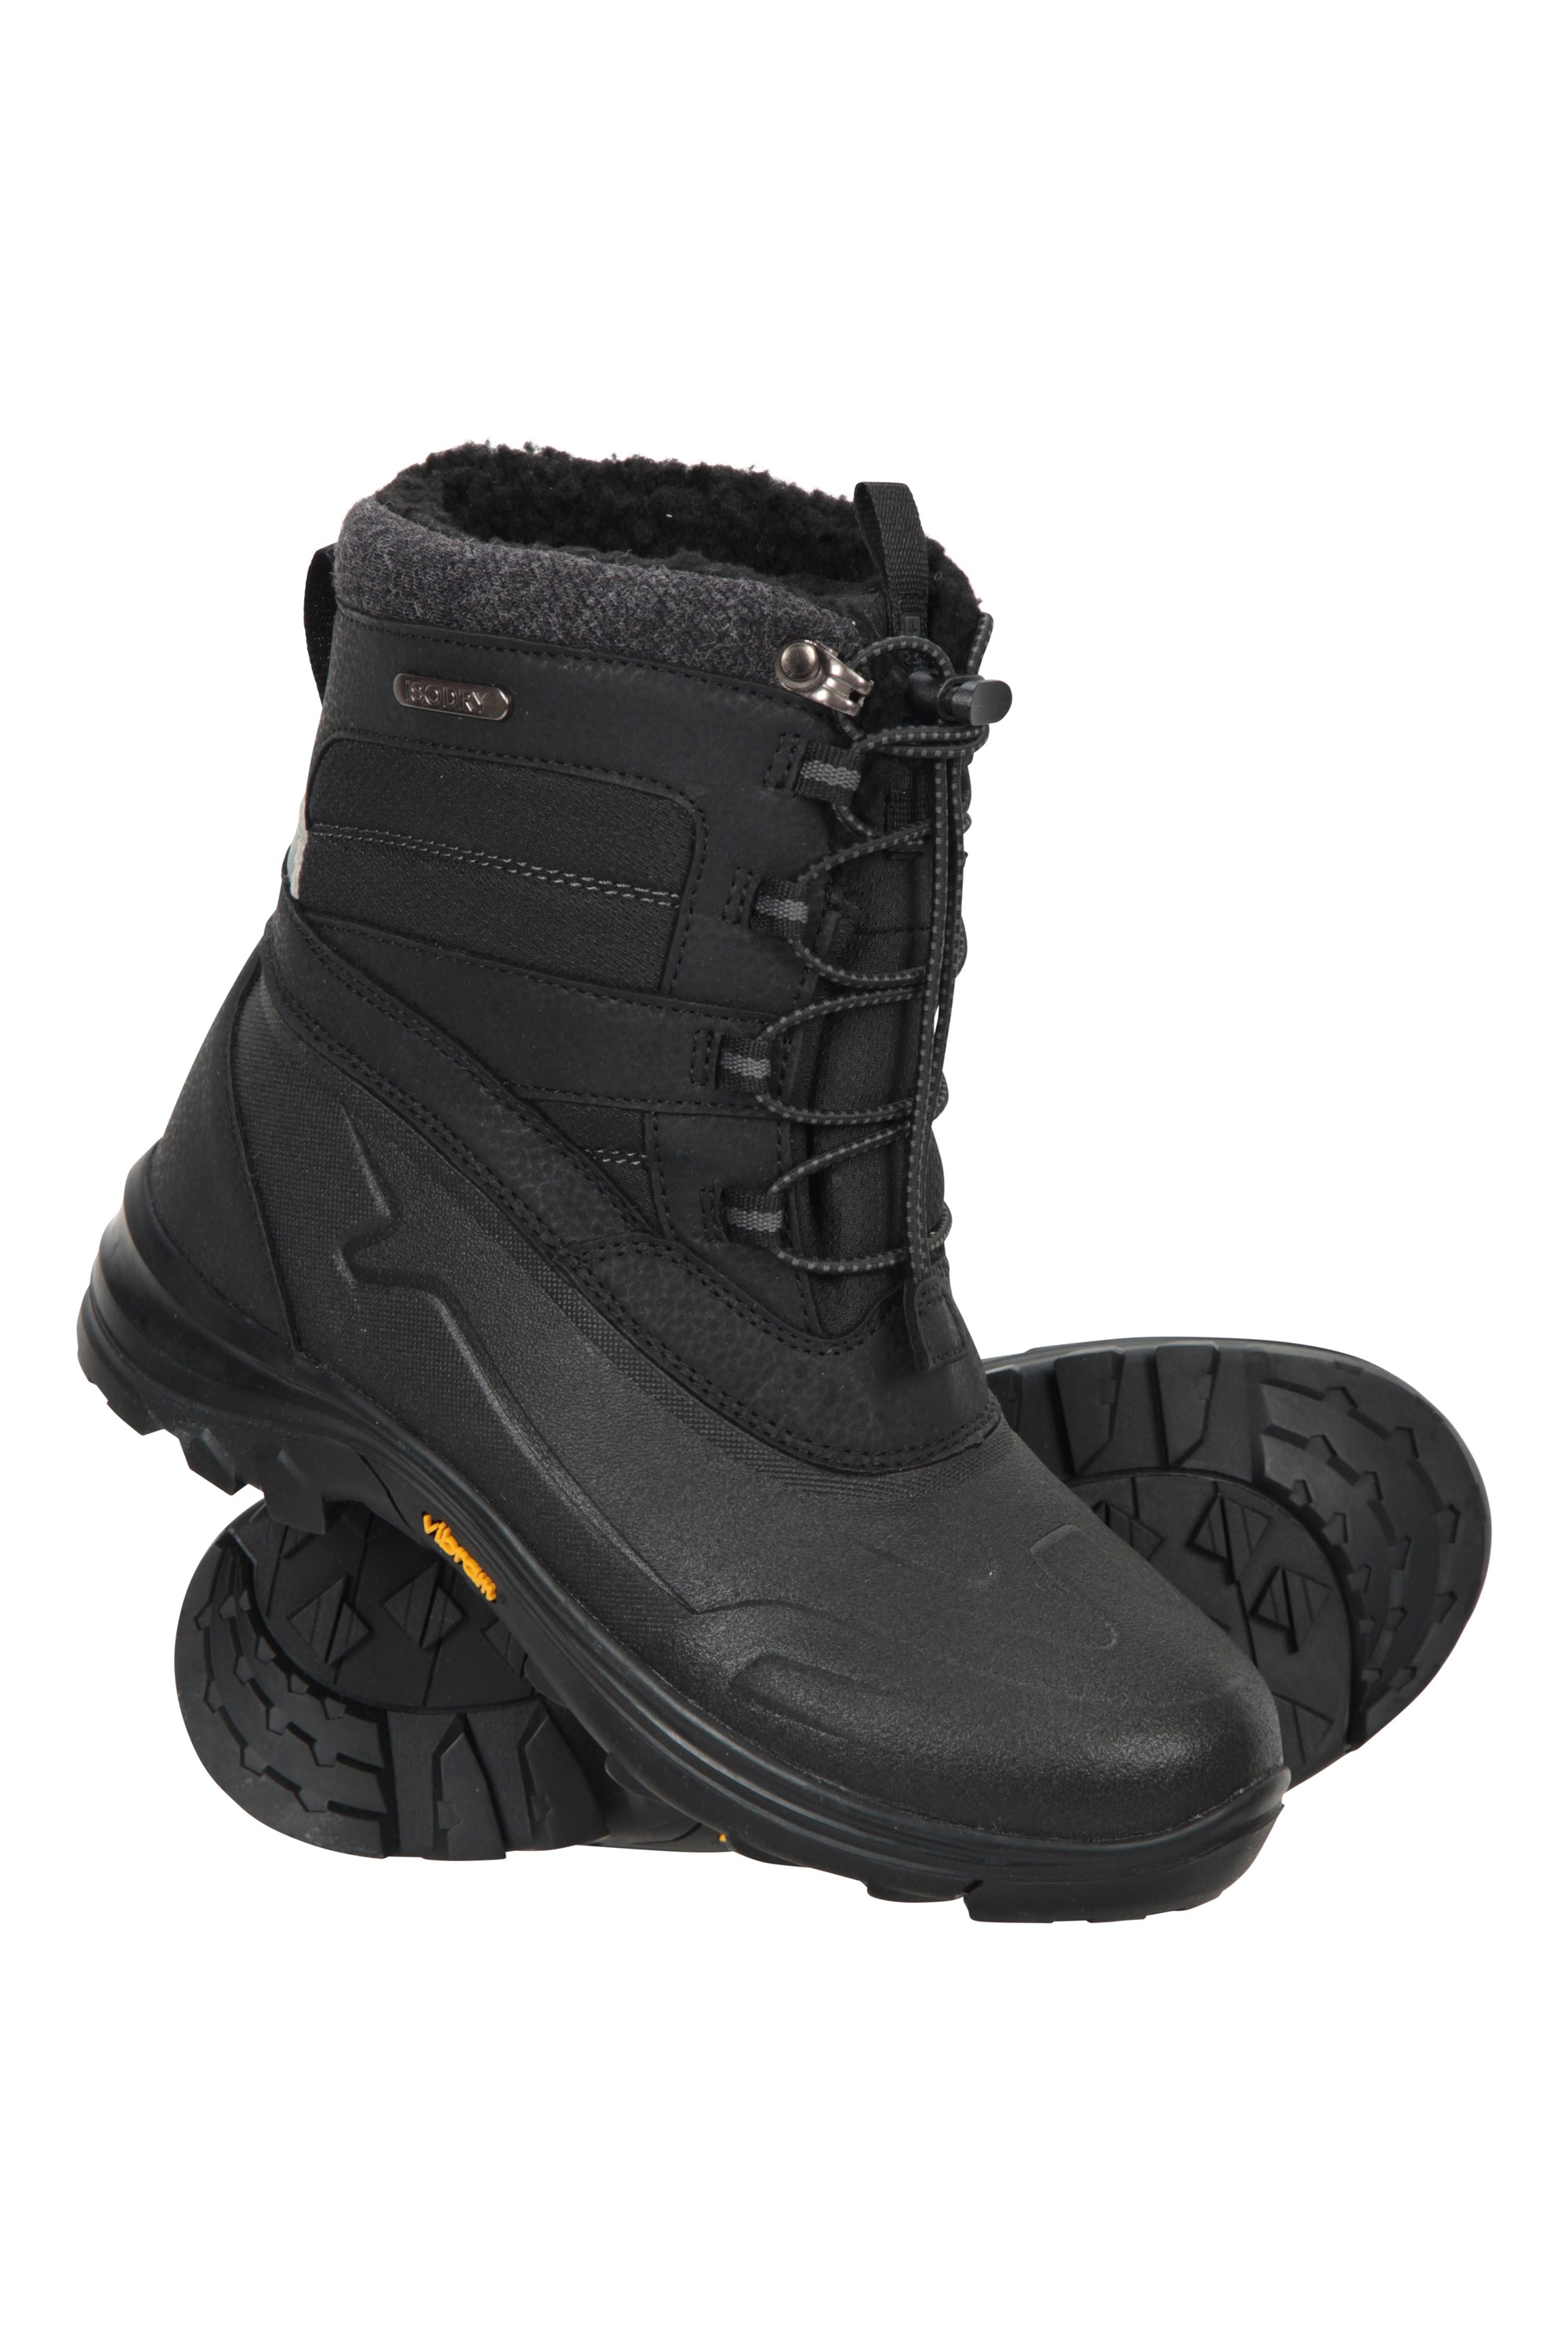 Mountain Warehouse Boys Snow Boots Durable and Breathable for Maximum Comfort 